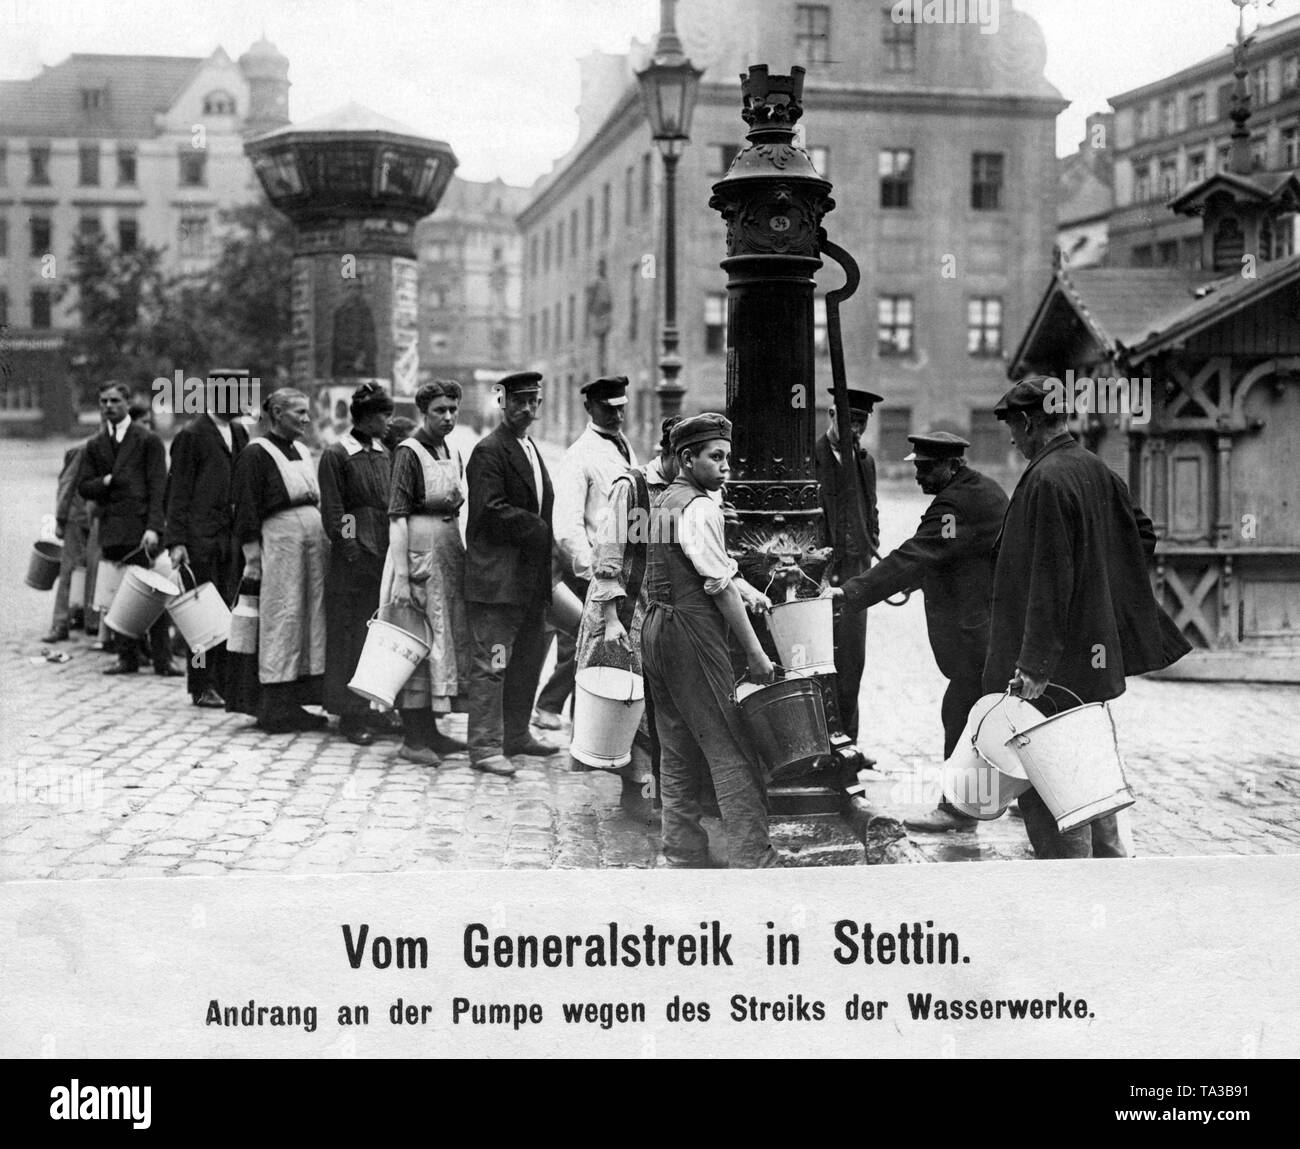 When the employees and workers of the municipal waterworks were on strike, the entire water supply of the population collapsed .The inhabitants of Stettin had to resort to the wells from the pre-industrial era still existing in the urban area. Stock Photo